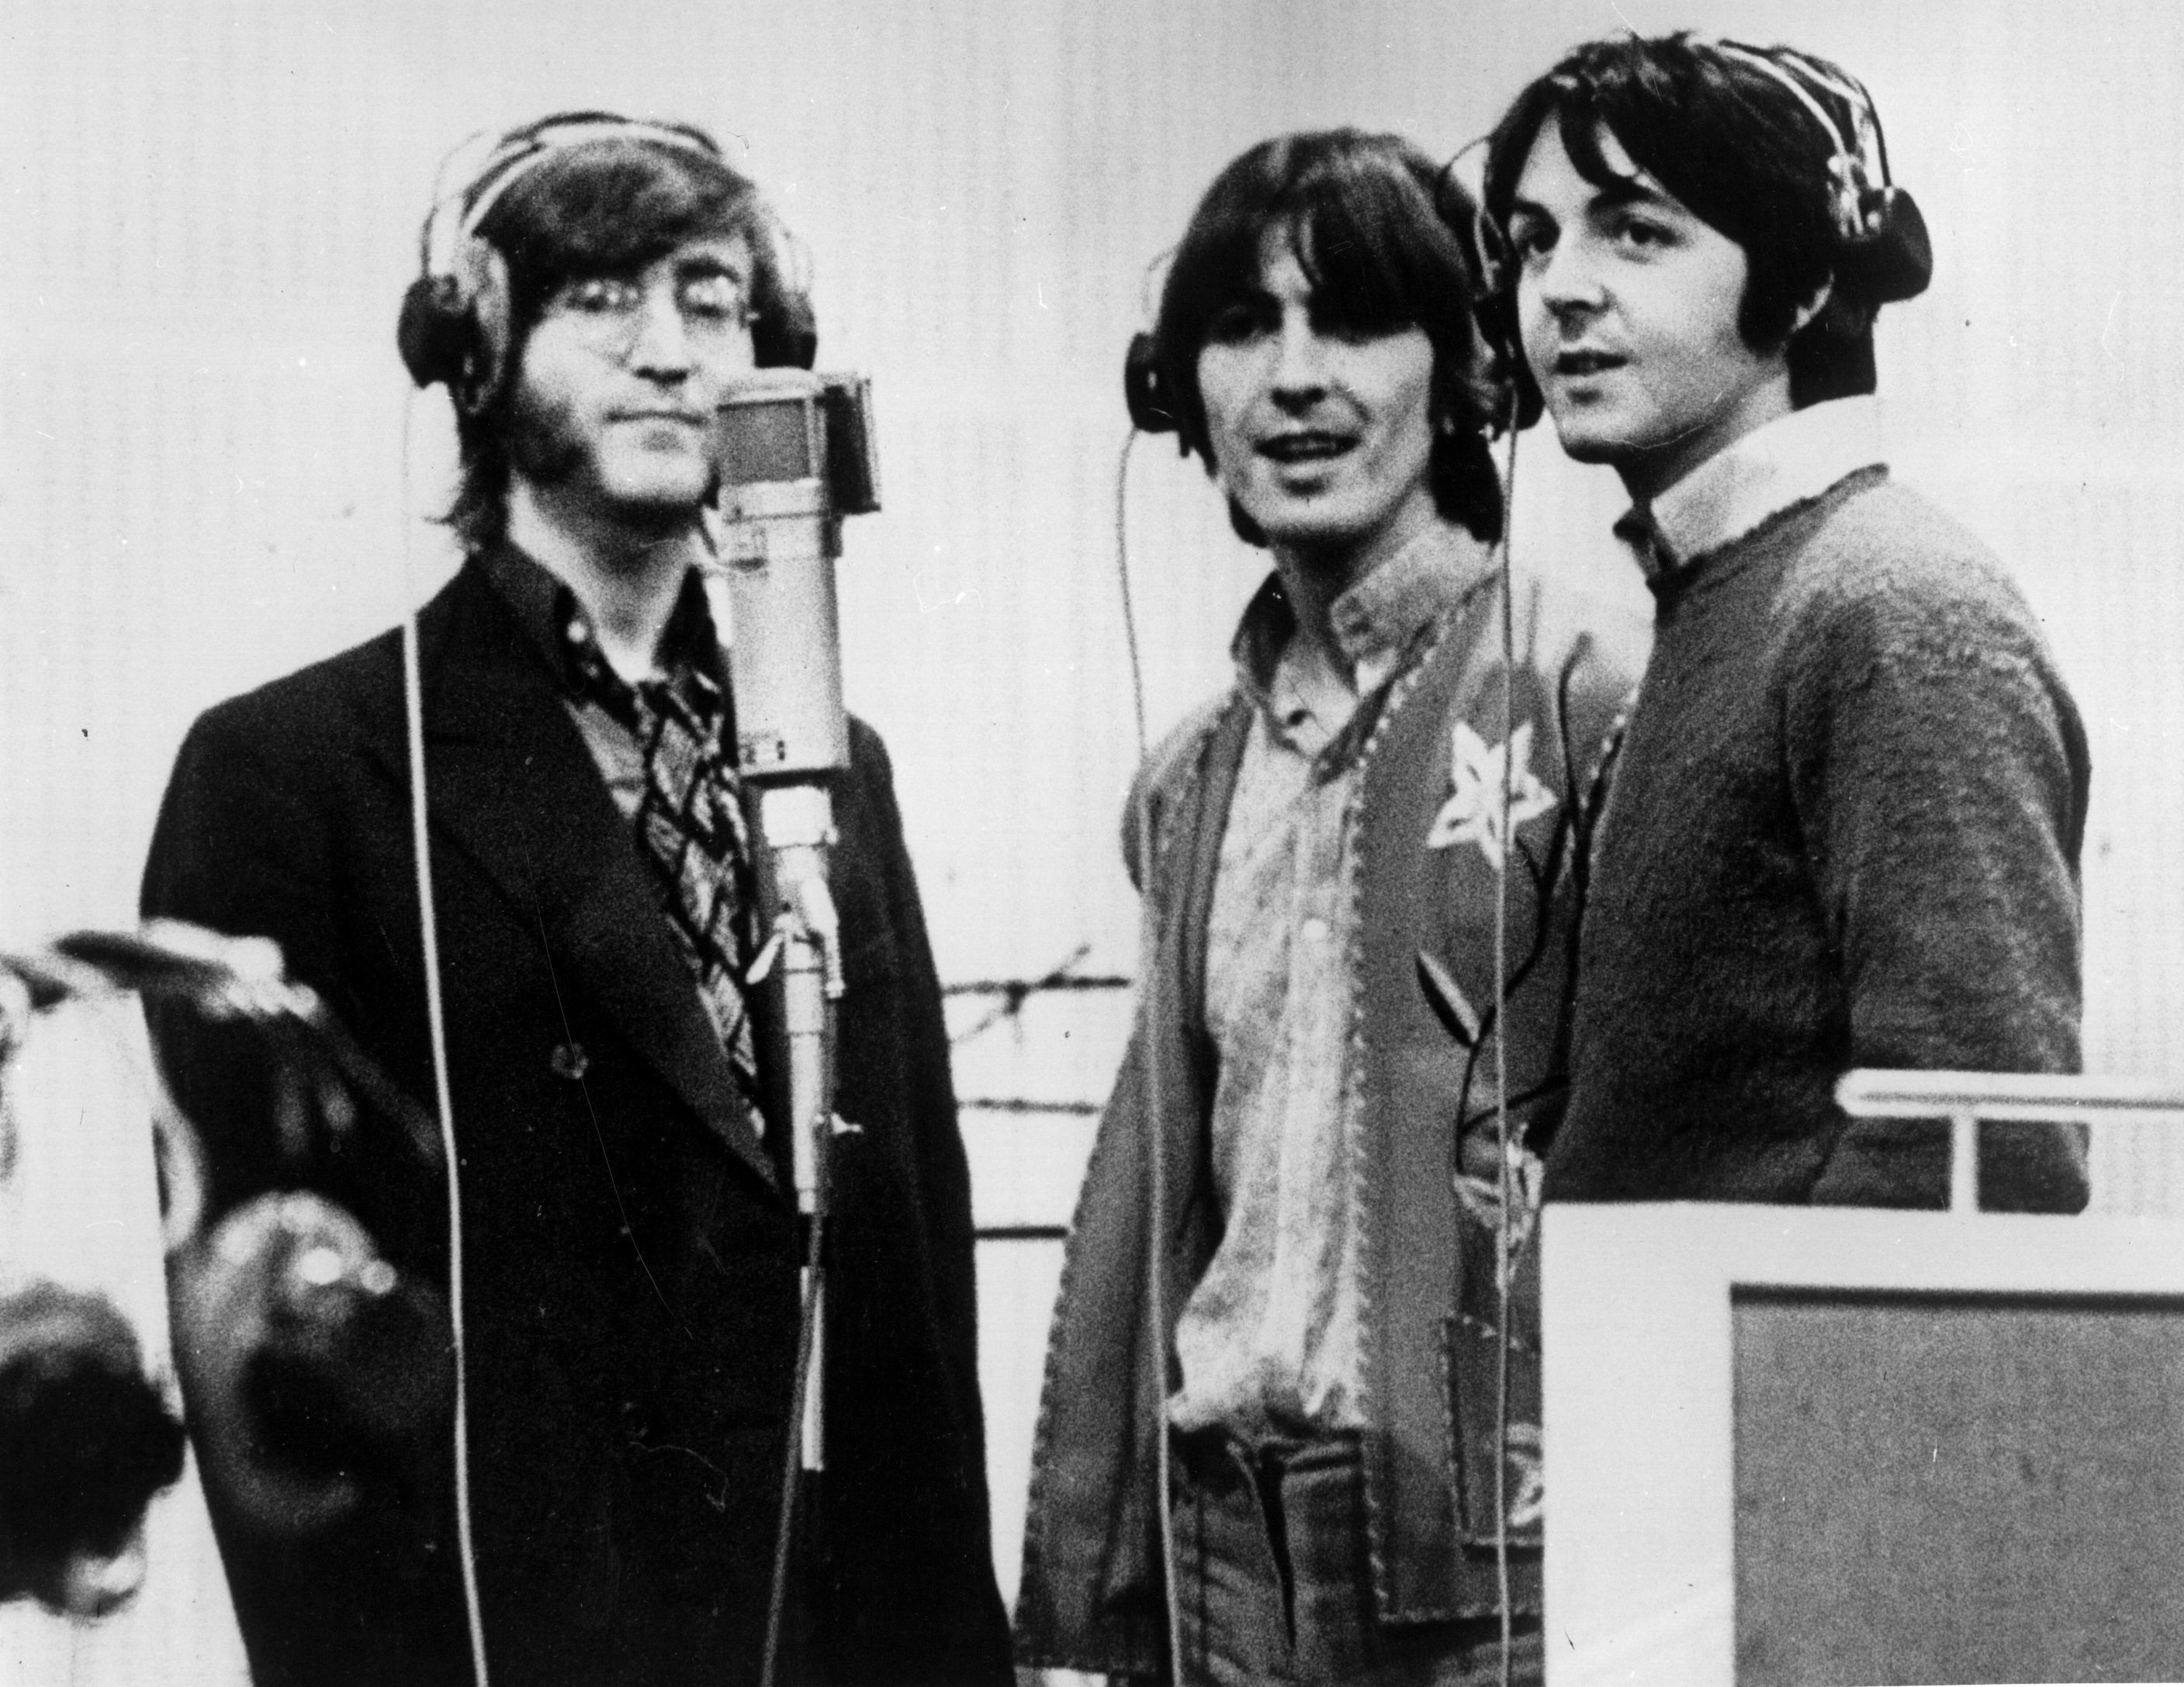 John Lennon, George Harrison, and Paul McCartney of The Beatles record their voices for the 'Yellow Submarine' movie